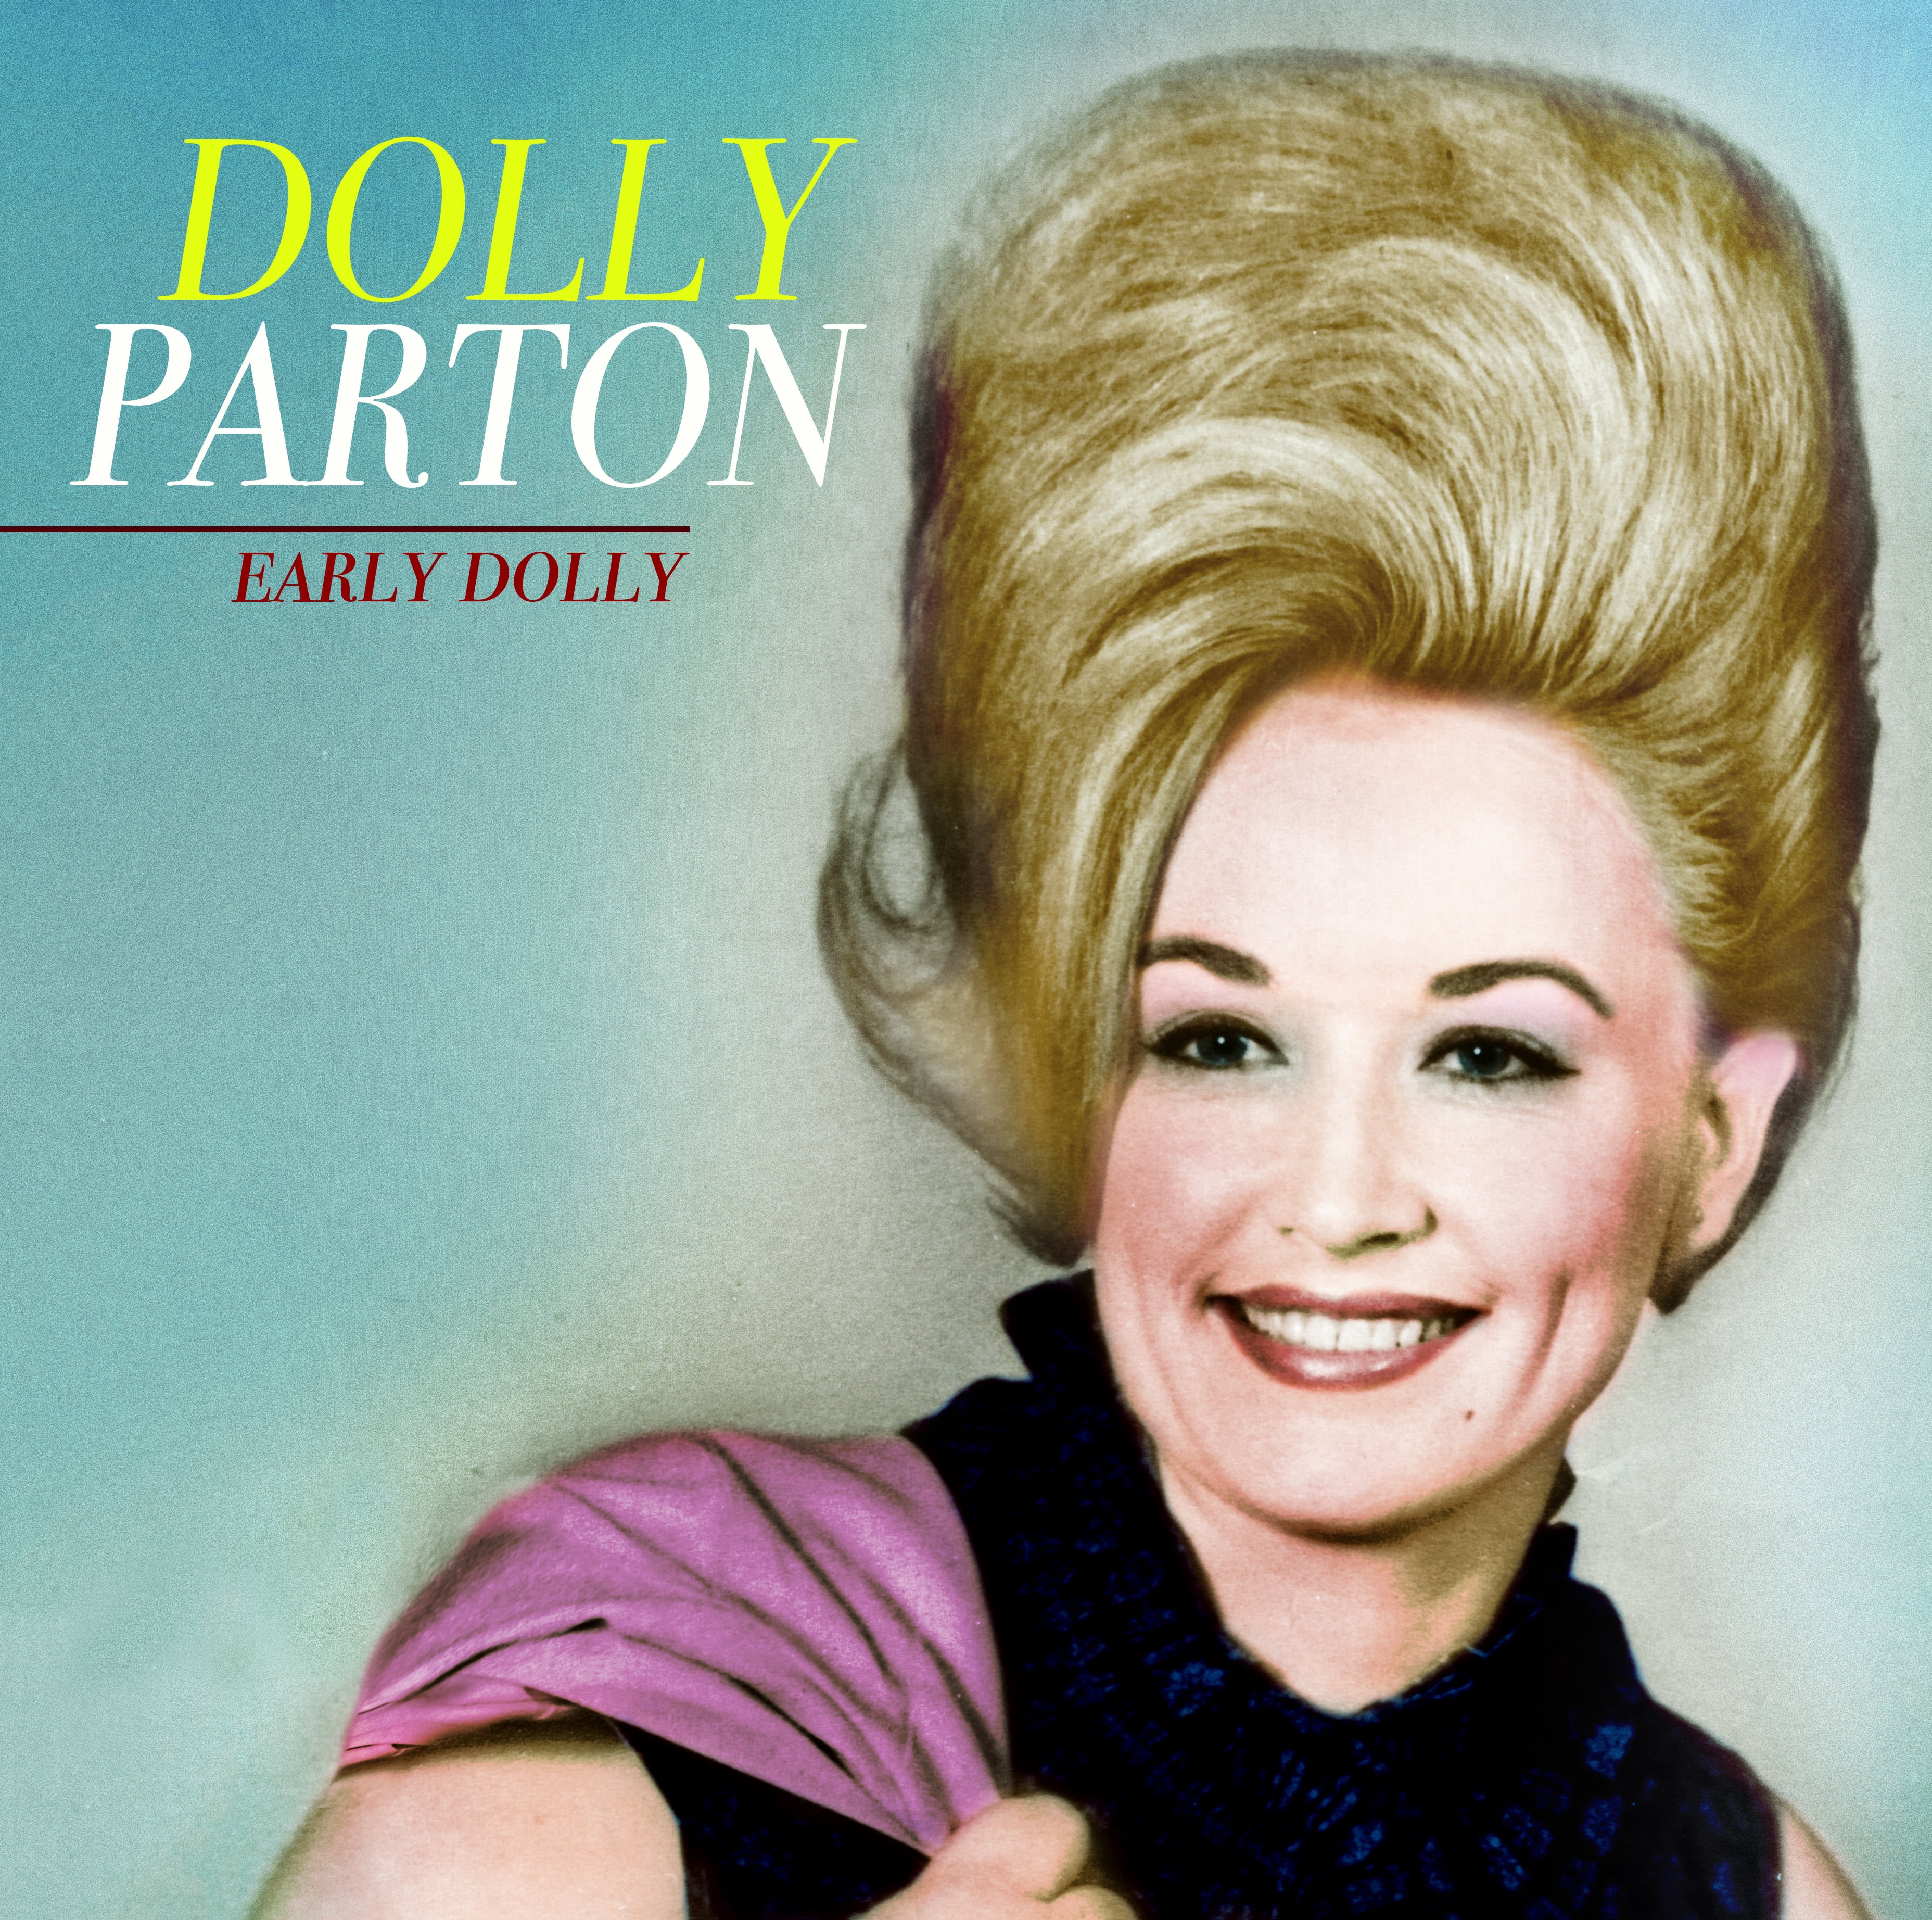 Dolly Parton Celebrity Card Face Mask 1 5 10 20 30 Party Wholesale 